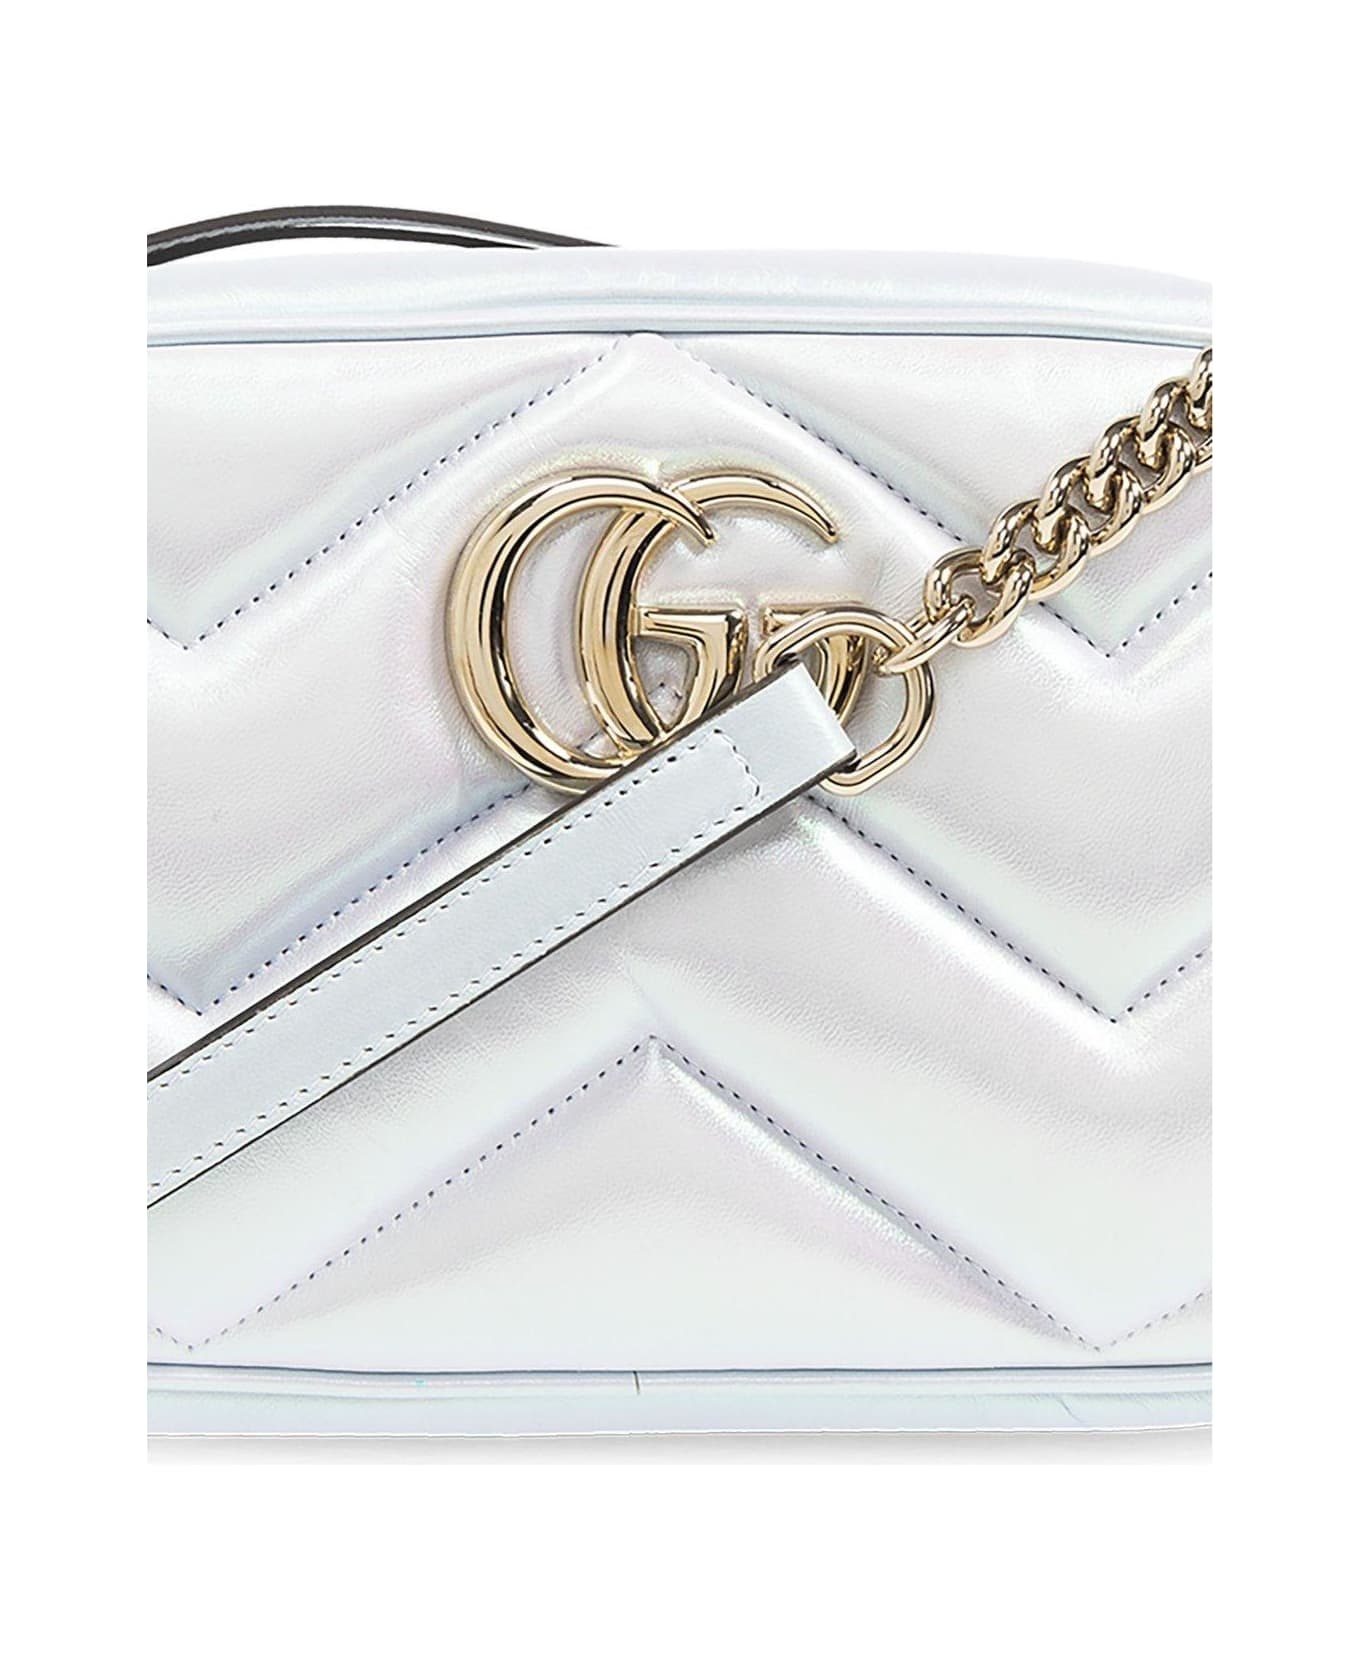 Gg Marmont Small Shoulder Bag - 5